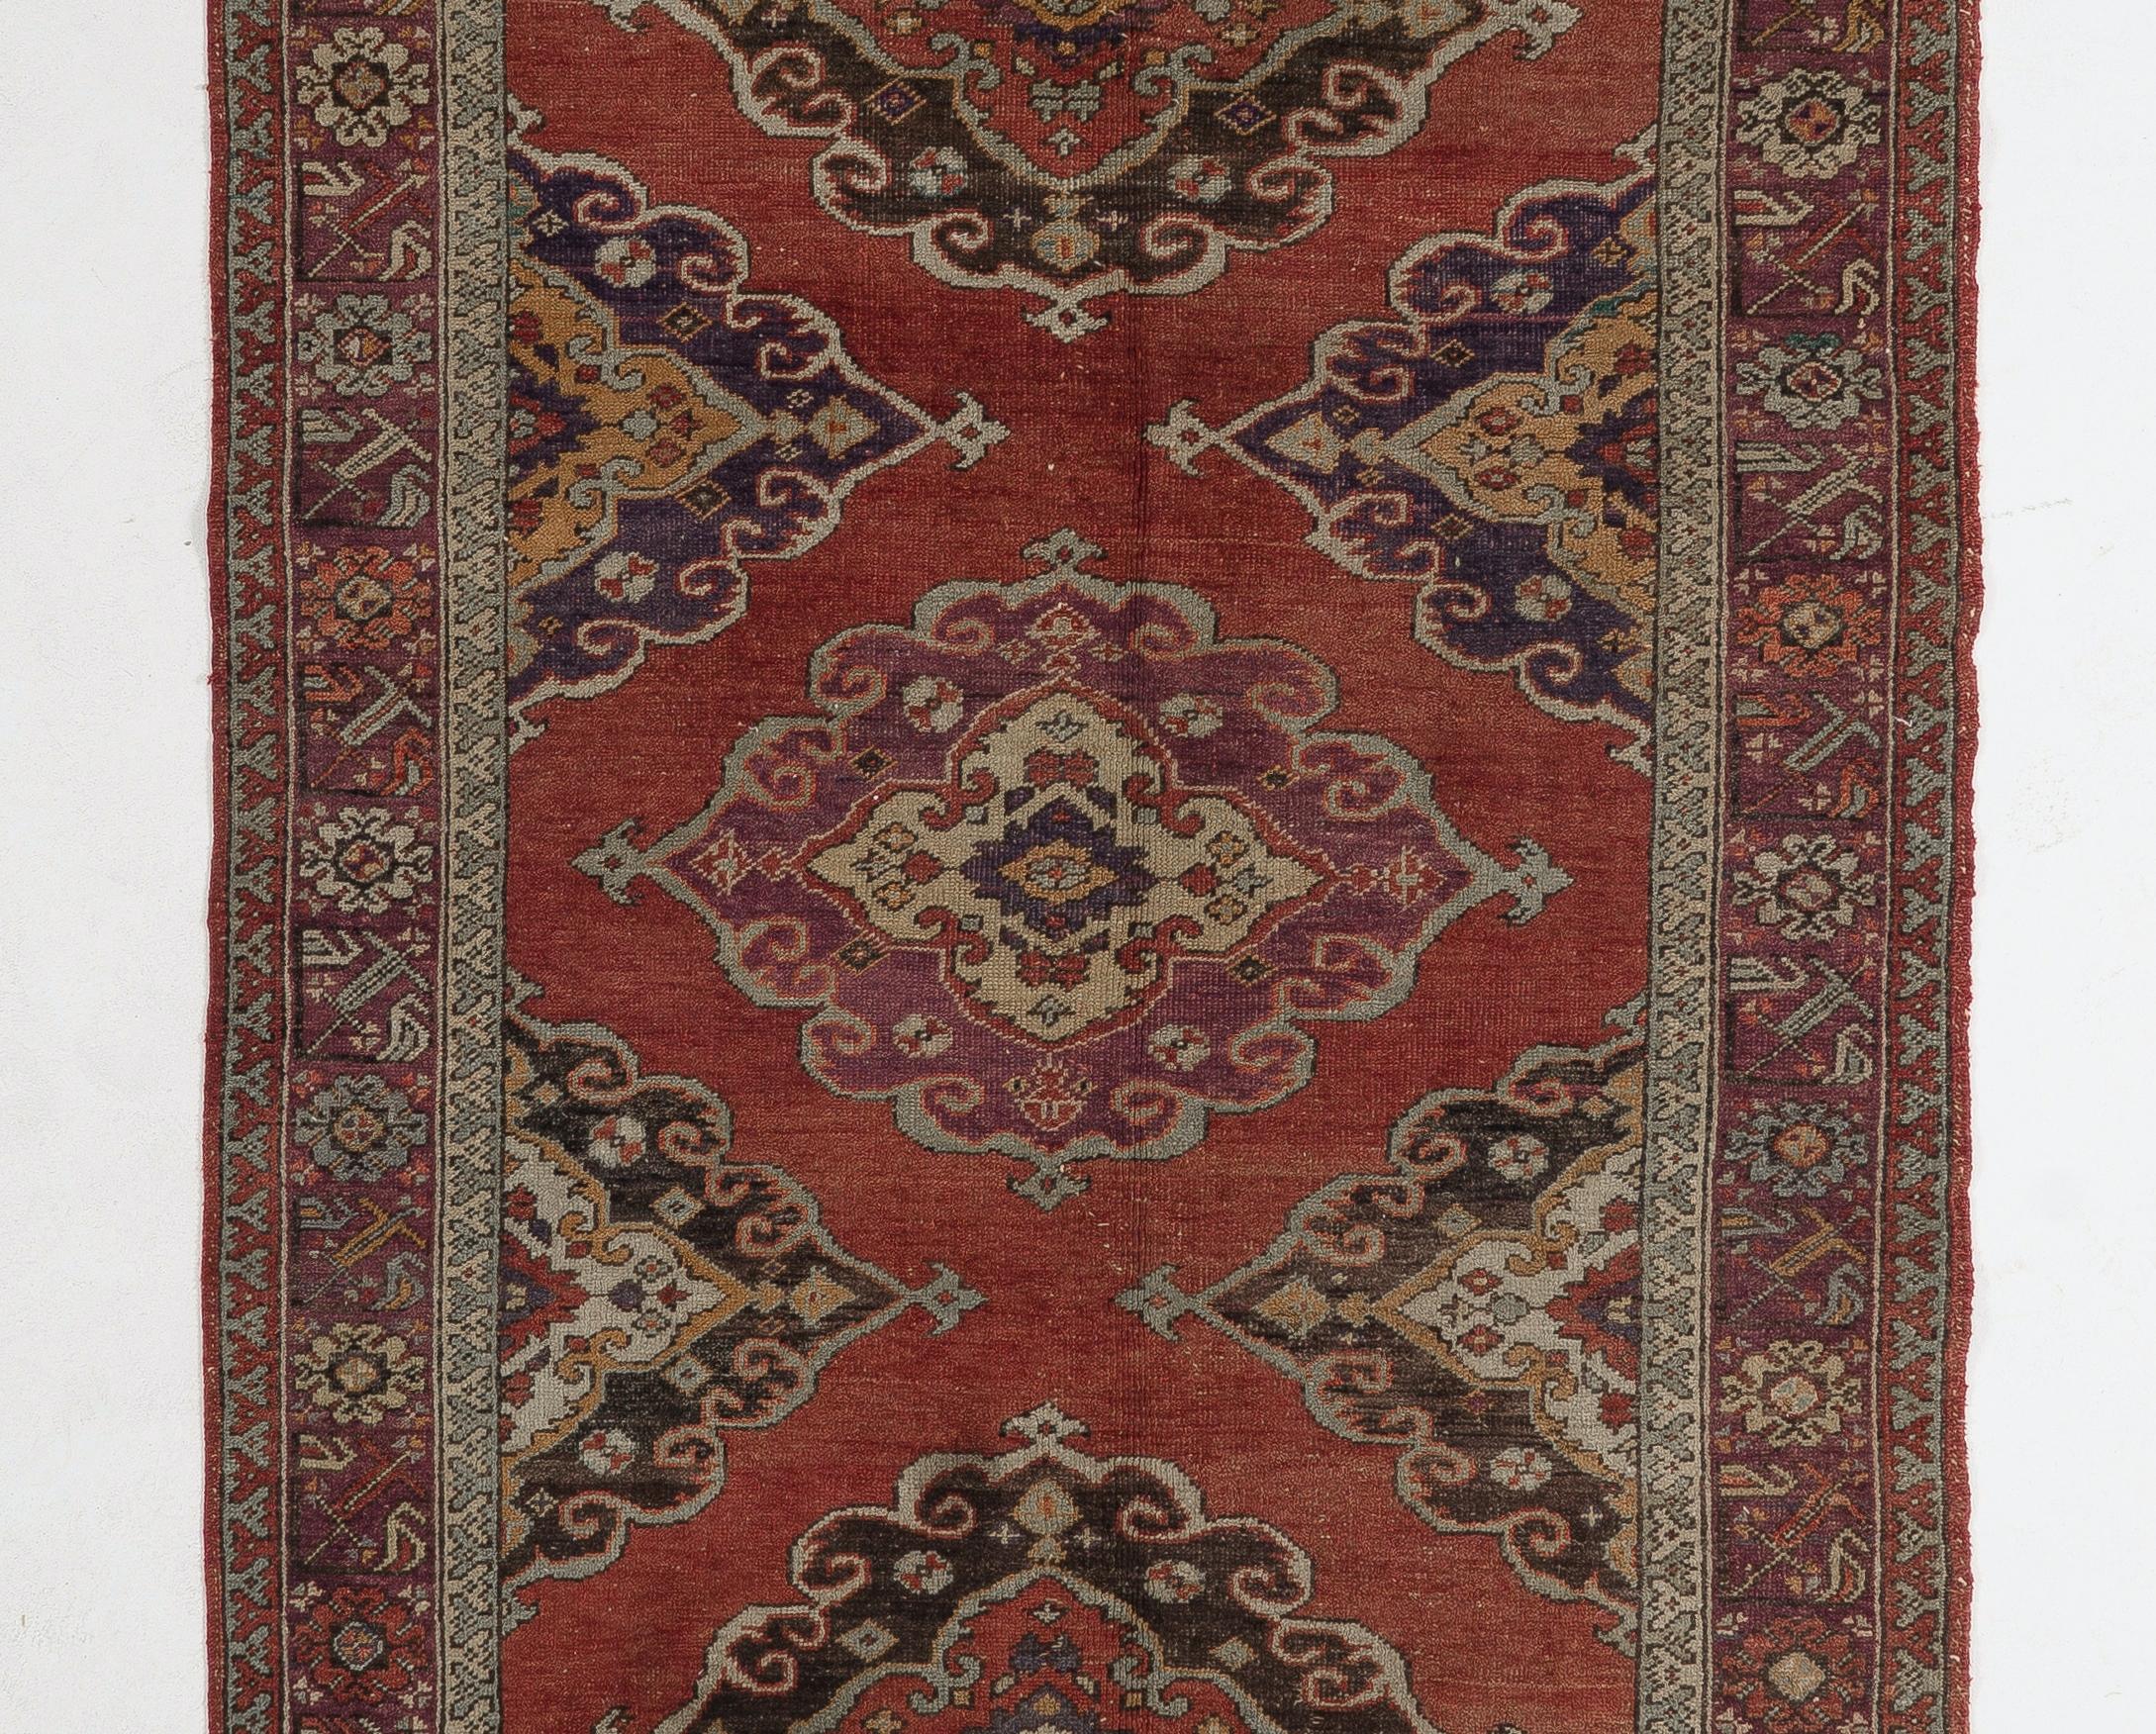 5x13.5 Ft Hand-Knotted Vintage Runner Rug, Turkish Tribal Style Corridor Carpet In Good Condition For Sale In Philadelphia, PA